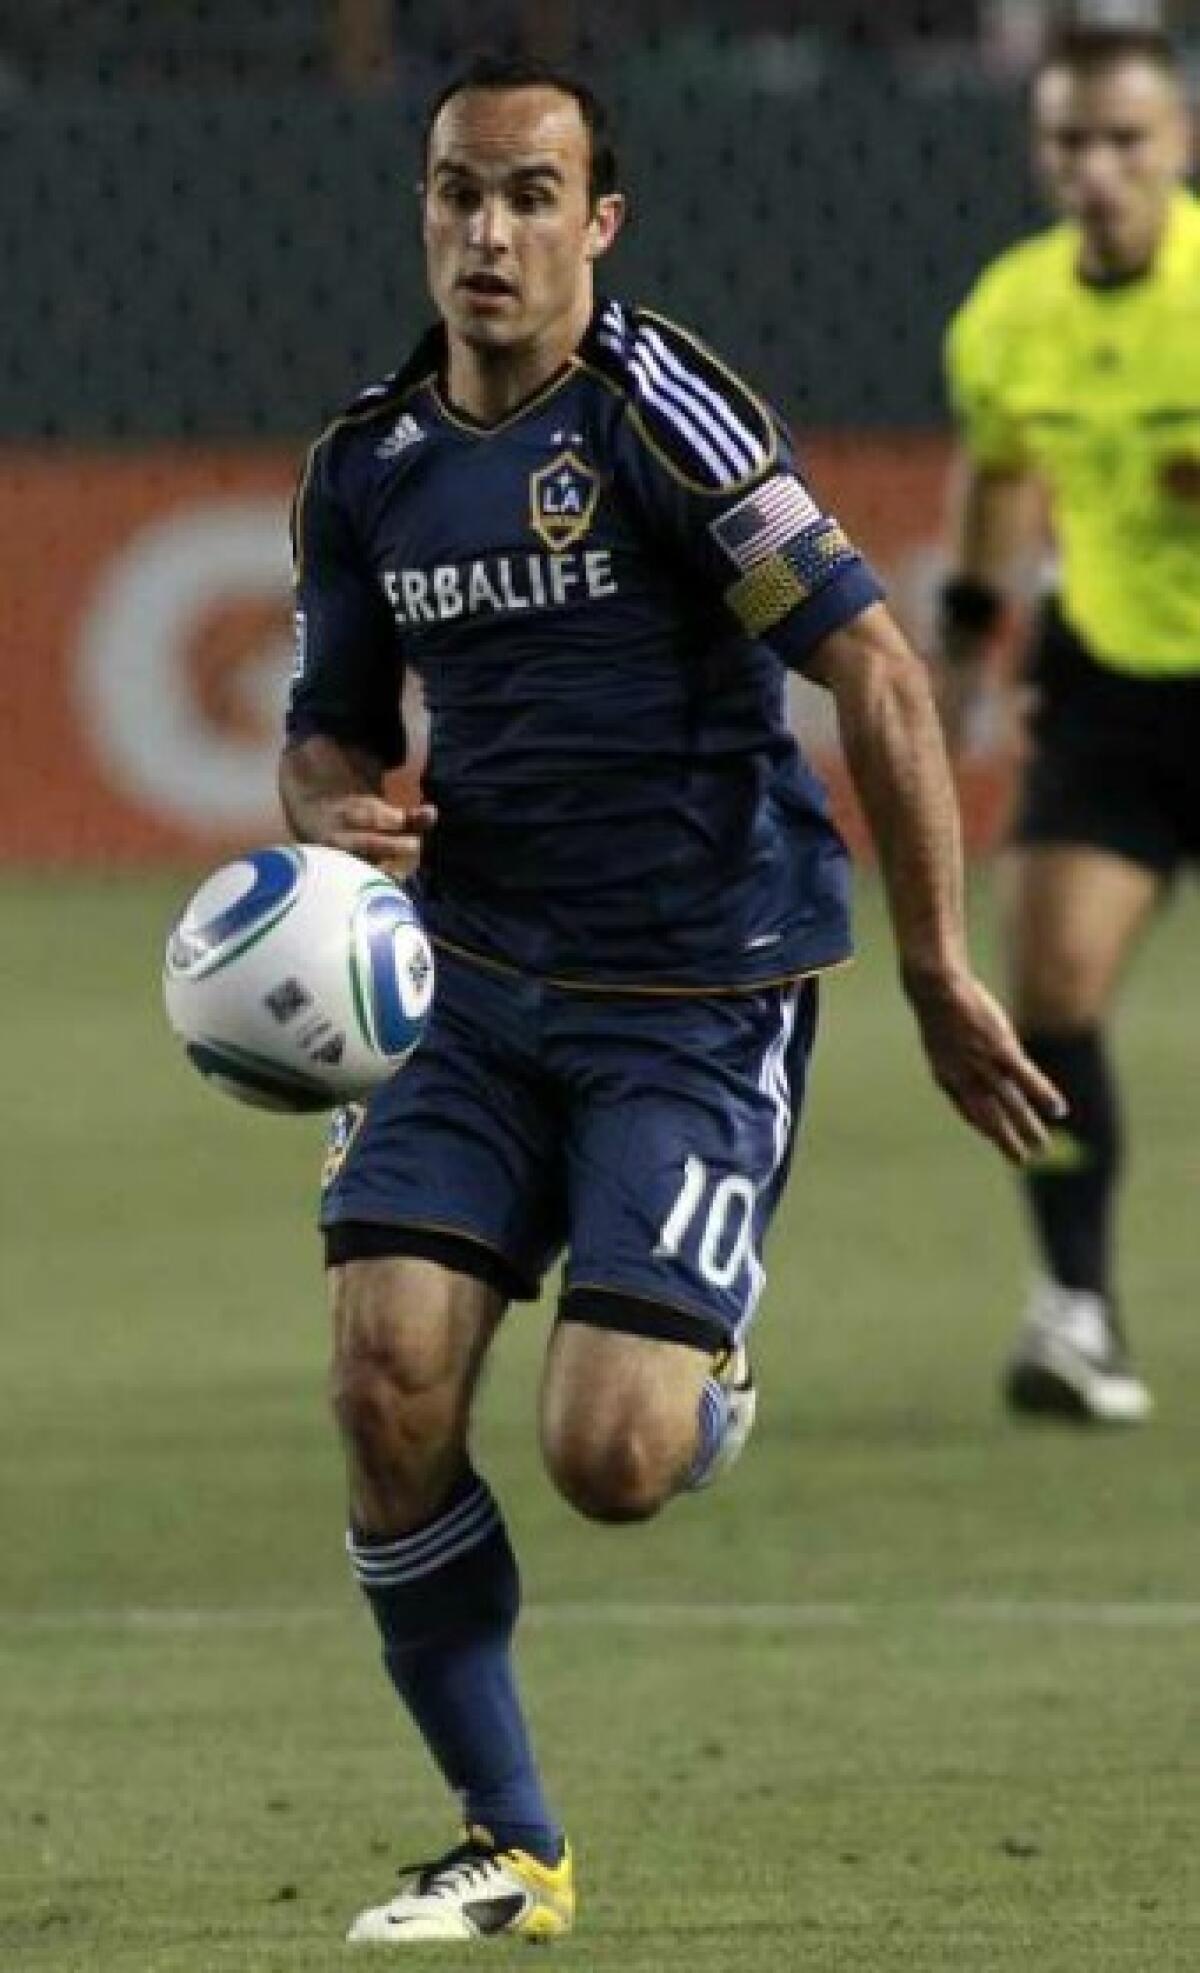 Galaxy midfielder Landon Donovan plays against the Houston Dynamo on May 25, 2011, at Home Depot Center in Carson.